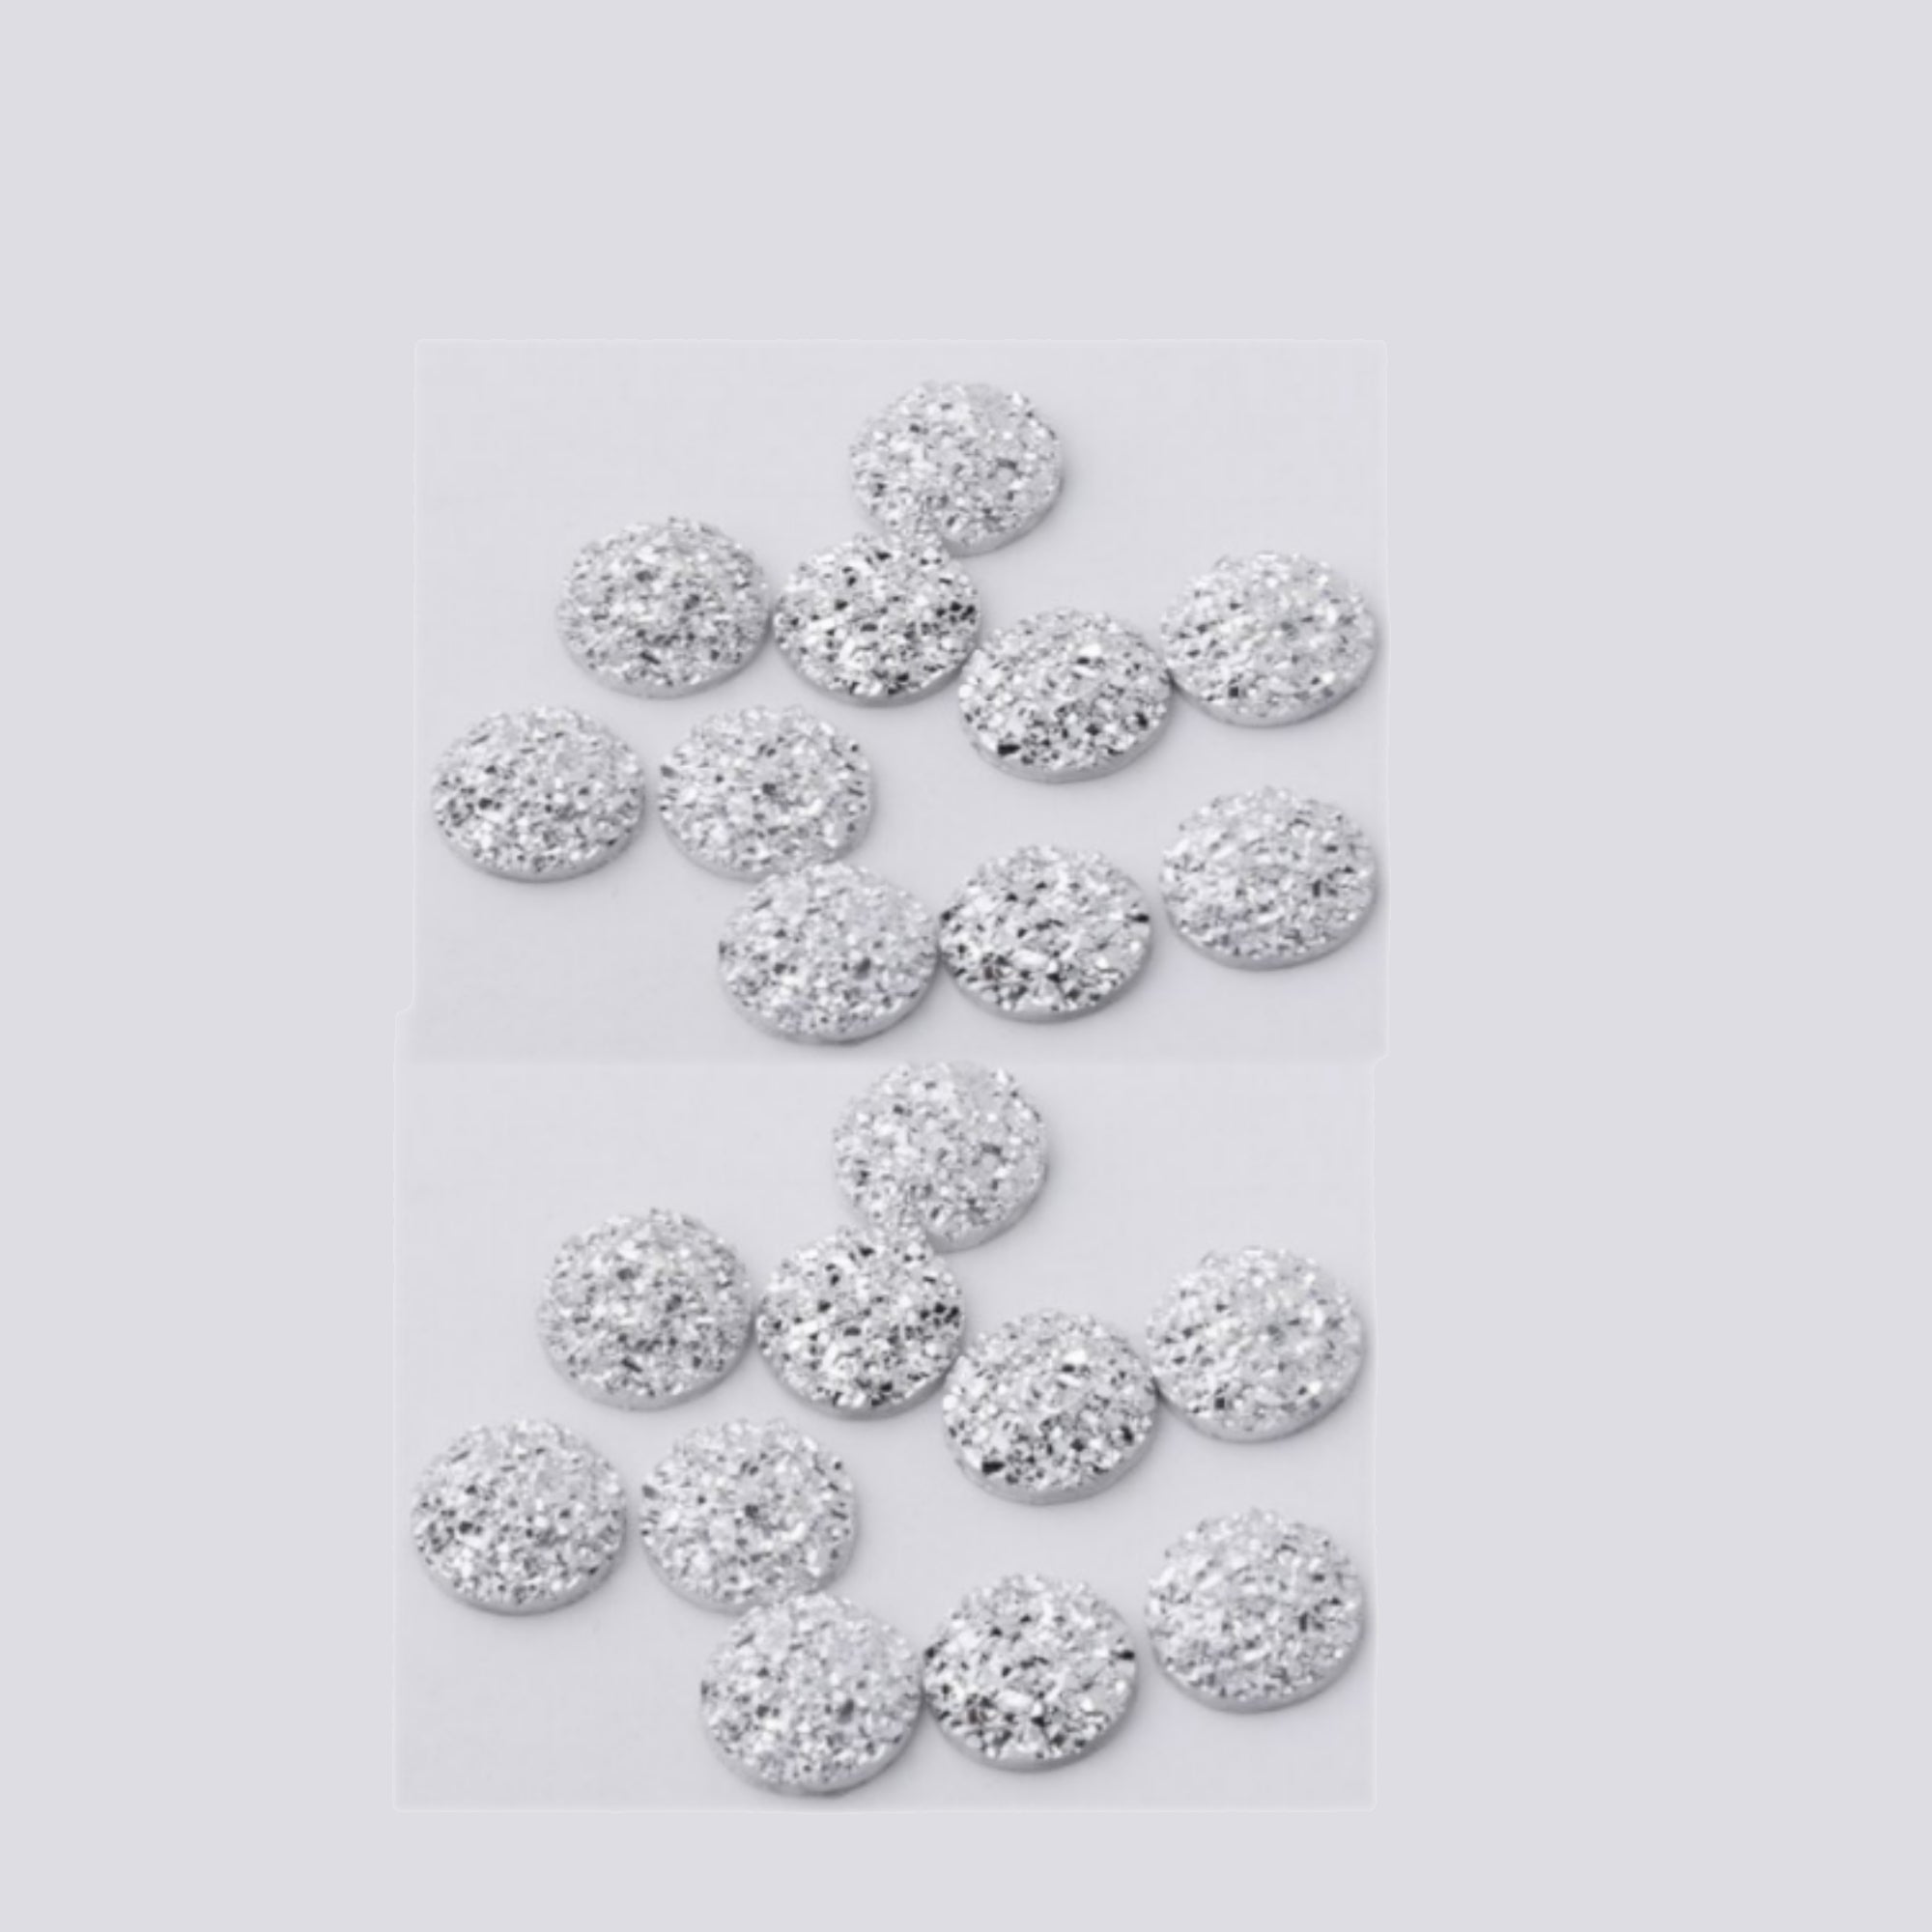 Bling It Up Collection 3/8" Silver Chunky Round Bling - Pkg. of 20